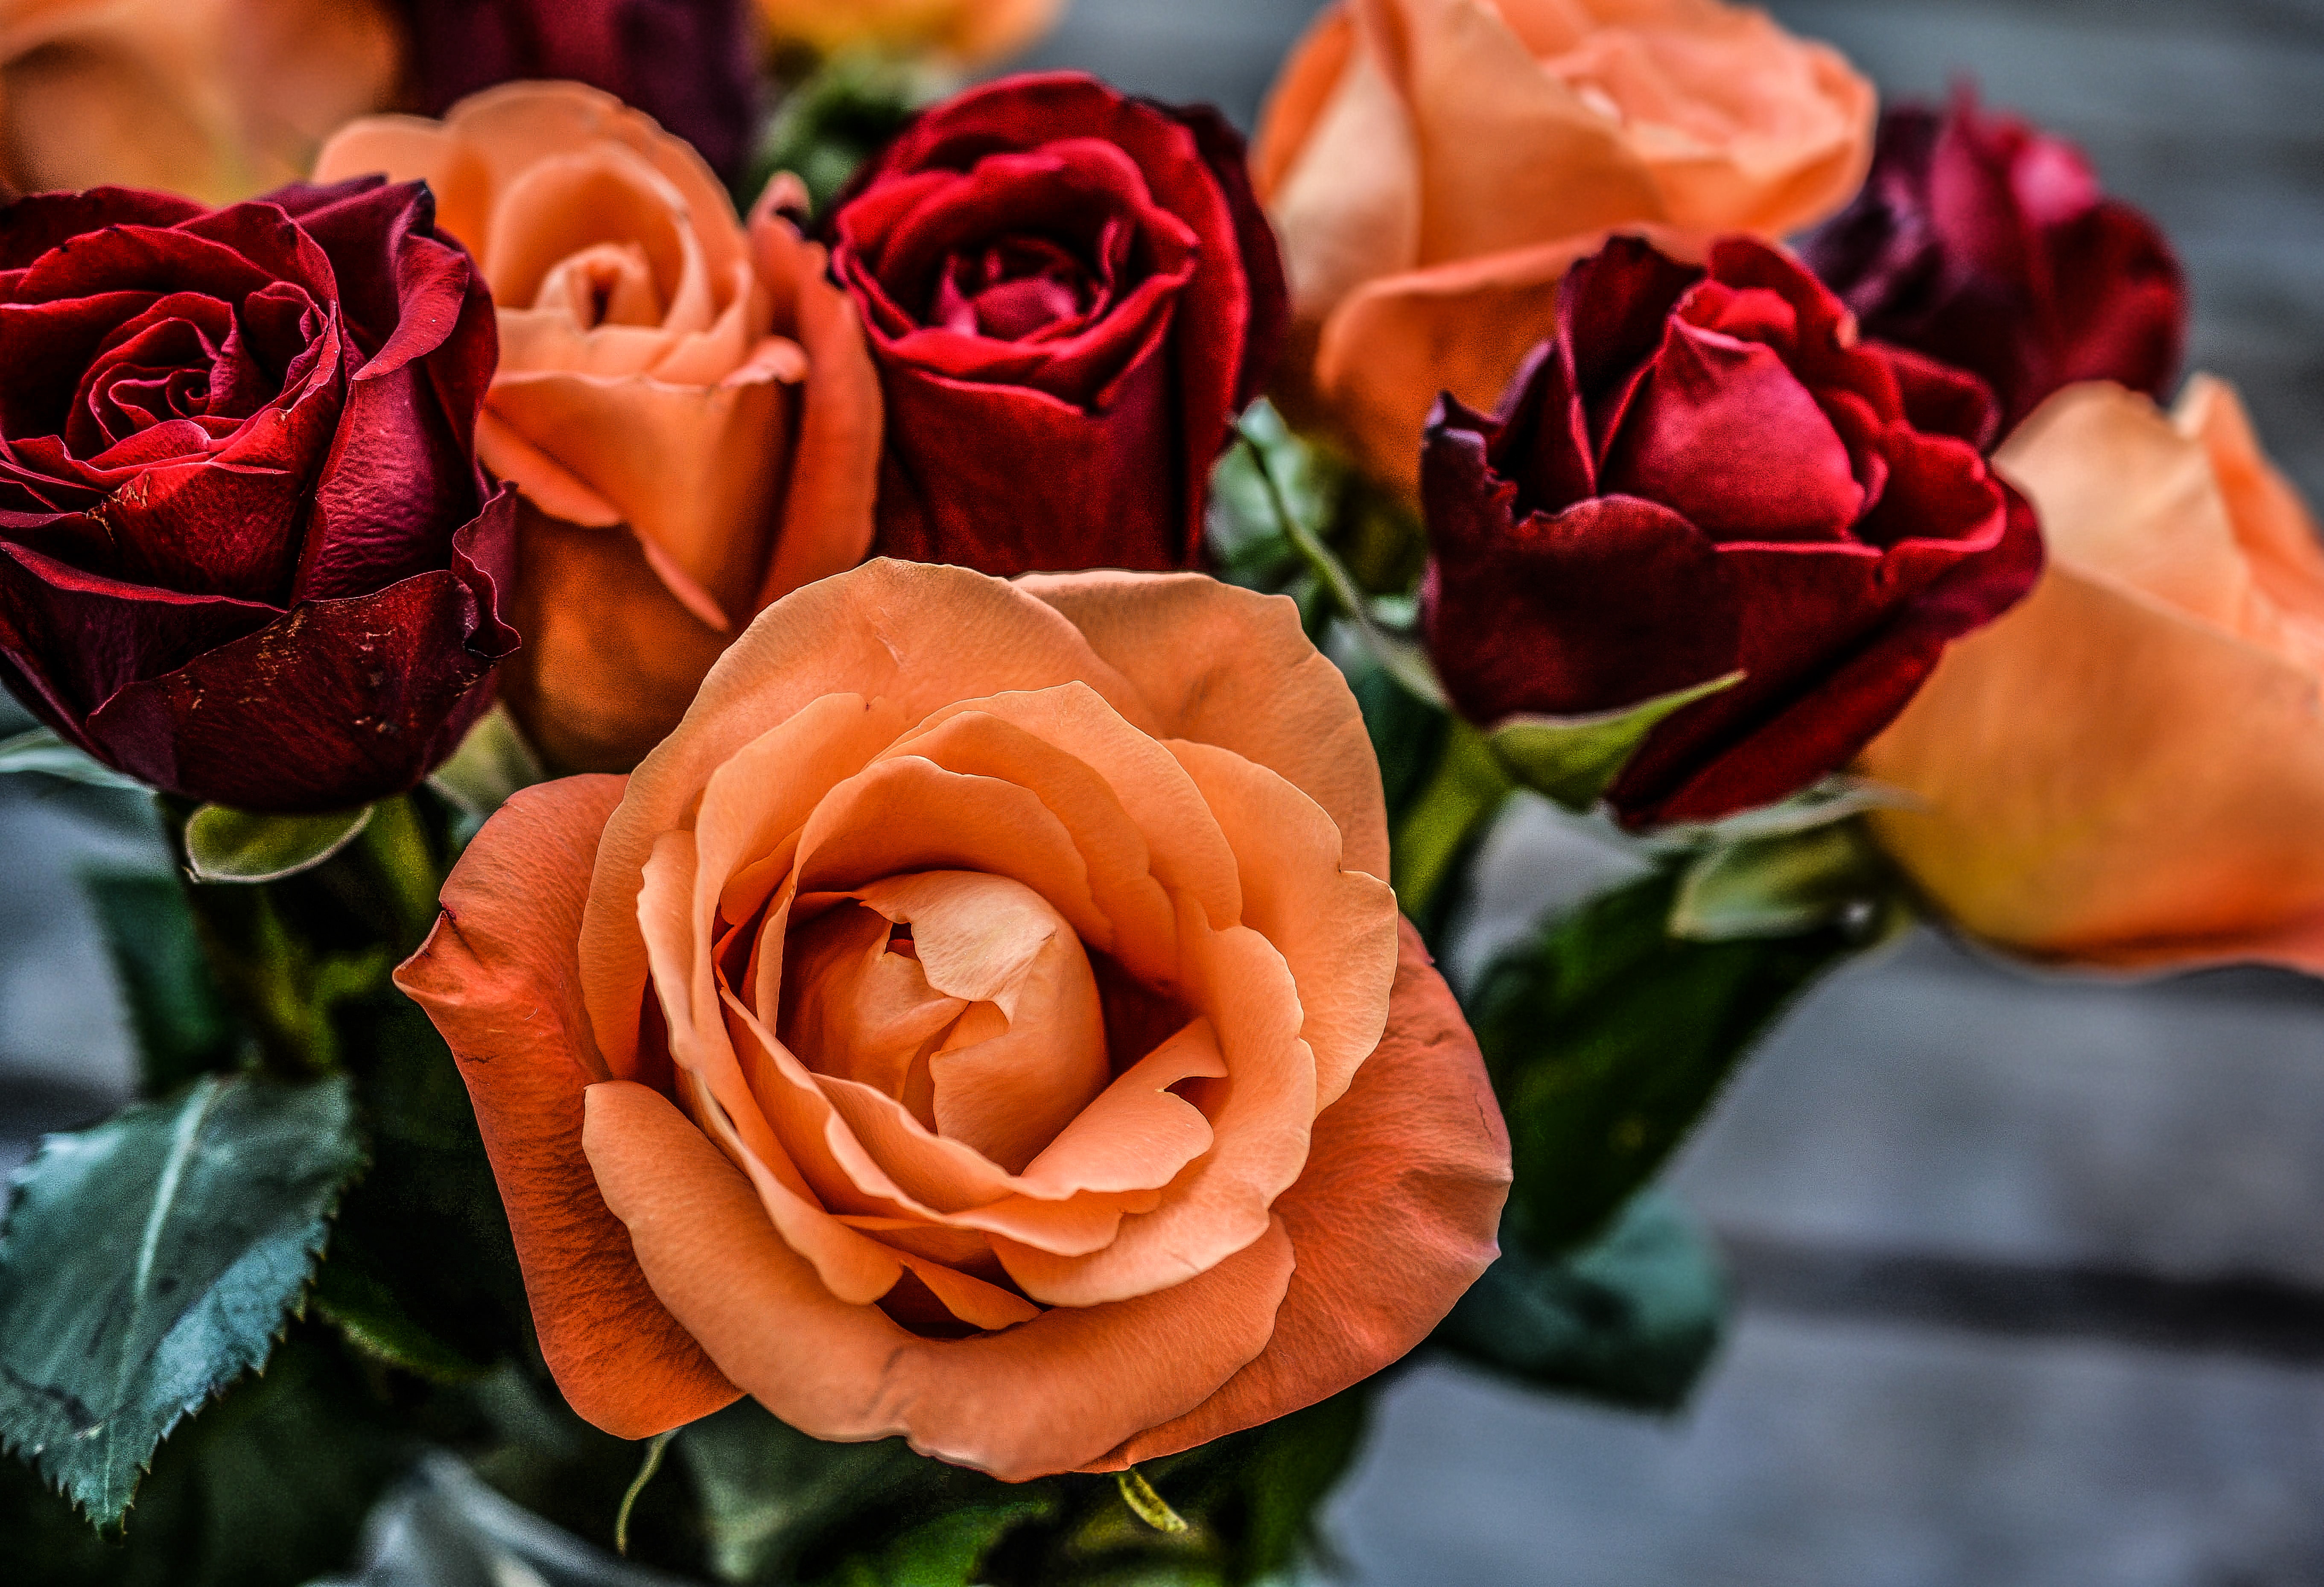 Landscape Photograph of Orange and Red Flowers, Anniversary, Flowers, Roses, Romantic, HQ Photo